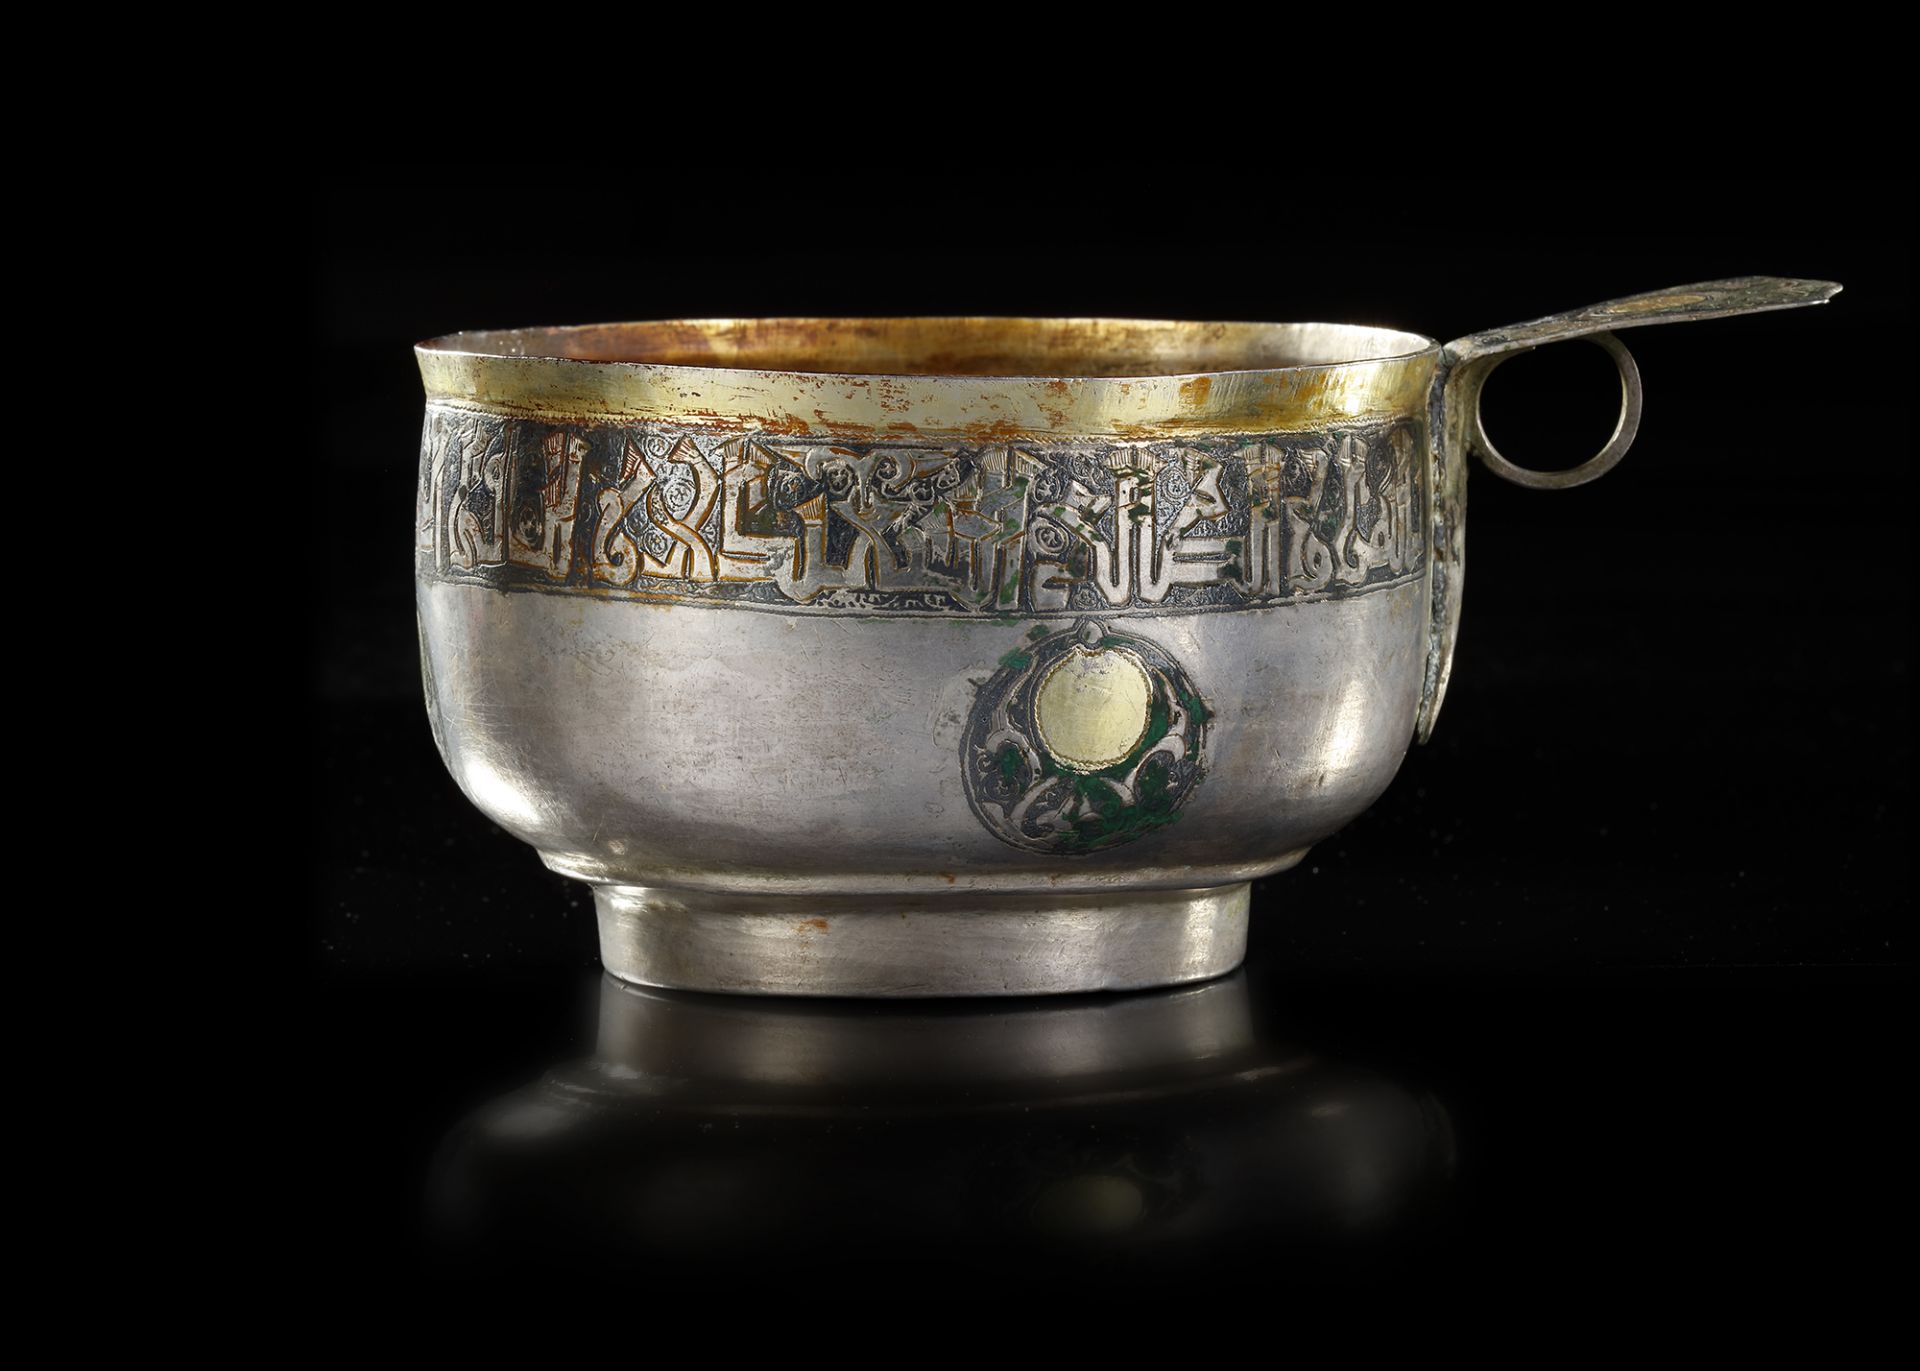 A RARE SILVER AND NIELLOED CUP WITH KUFIC INSCRIPTION, PERSIA OR CENTRAL ASIA, 11TH-12TH CENTURY - Image 2 of 34